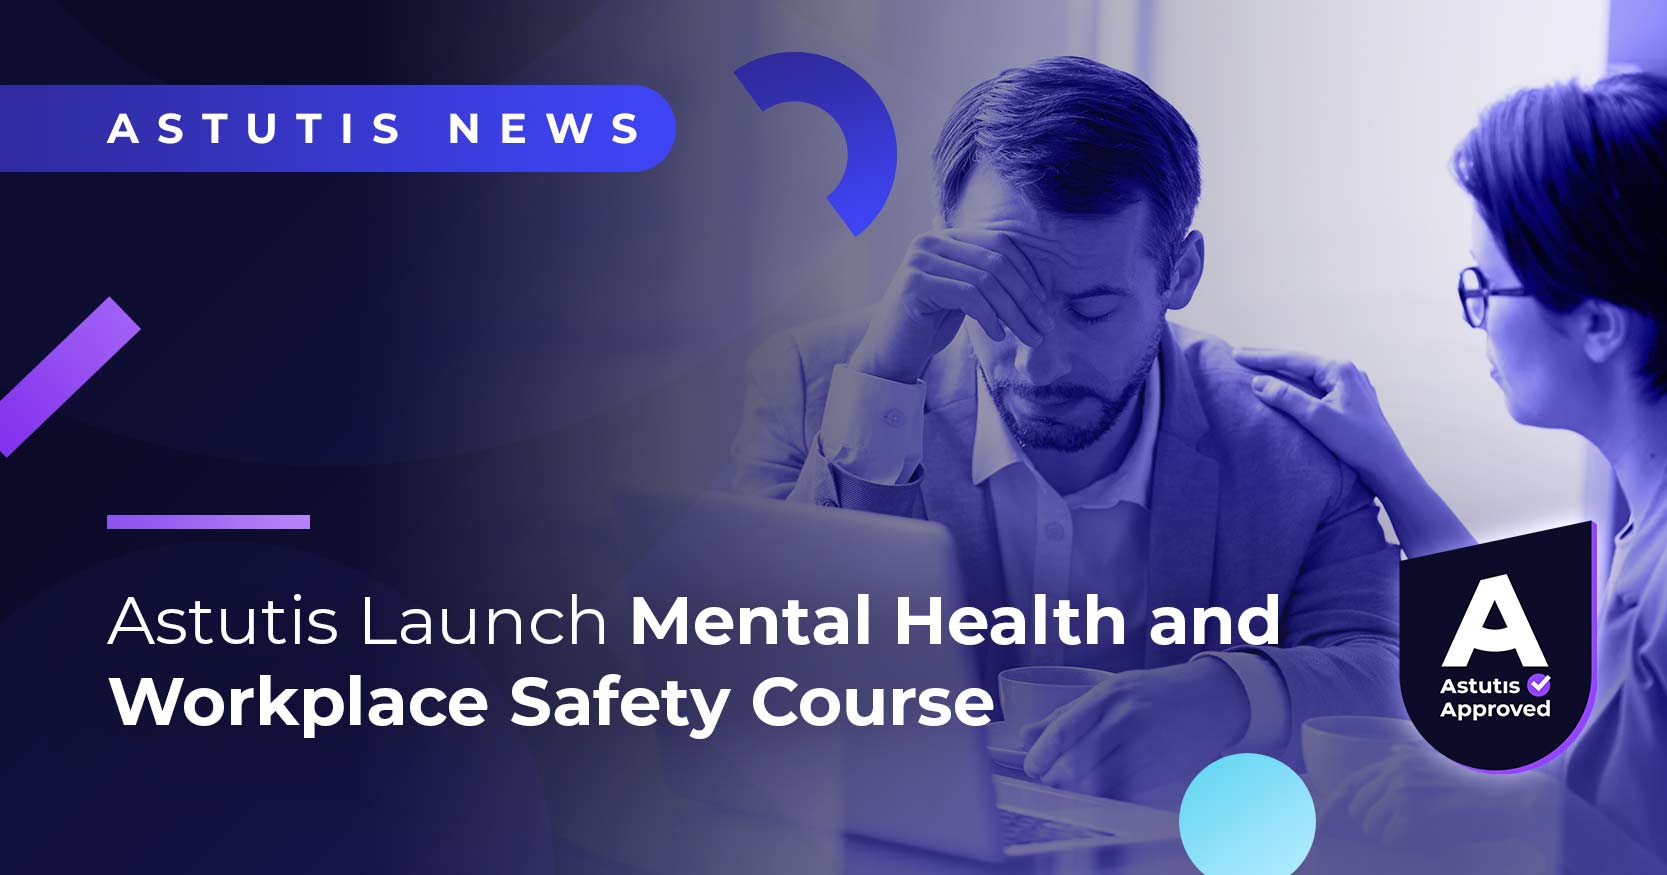 Astutis Launch Mental Health and Workplace Safety Course